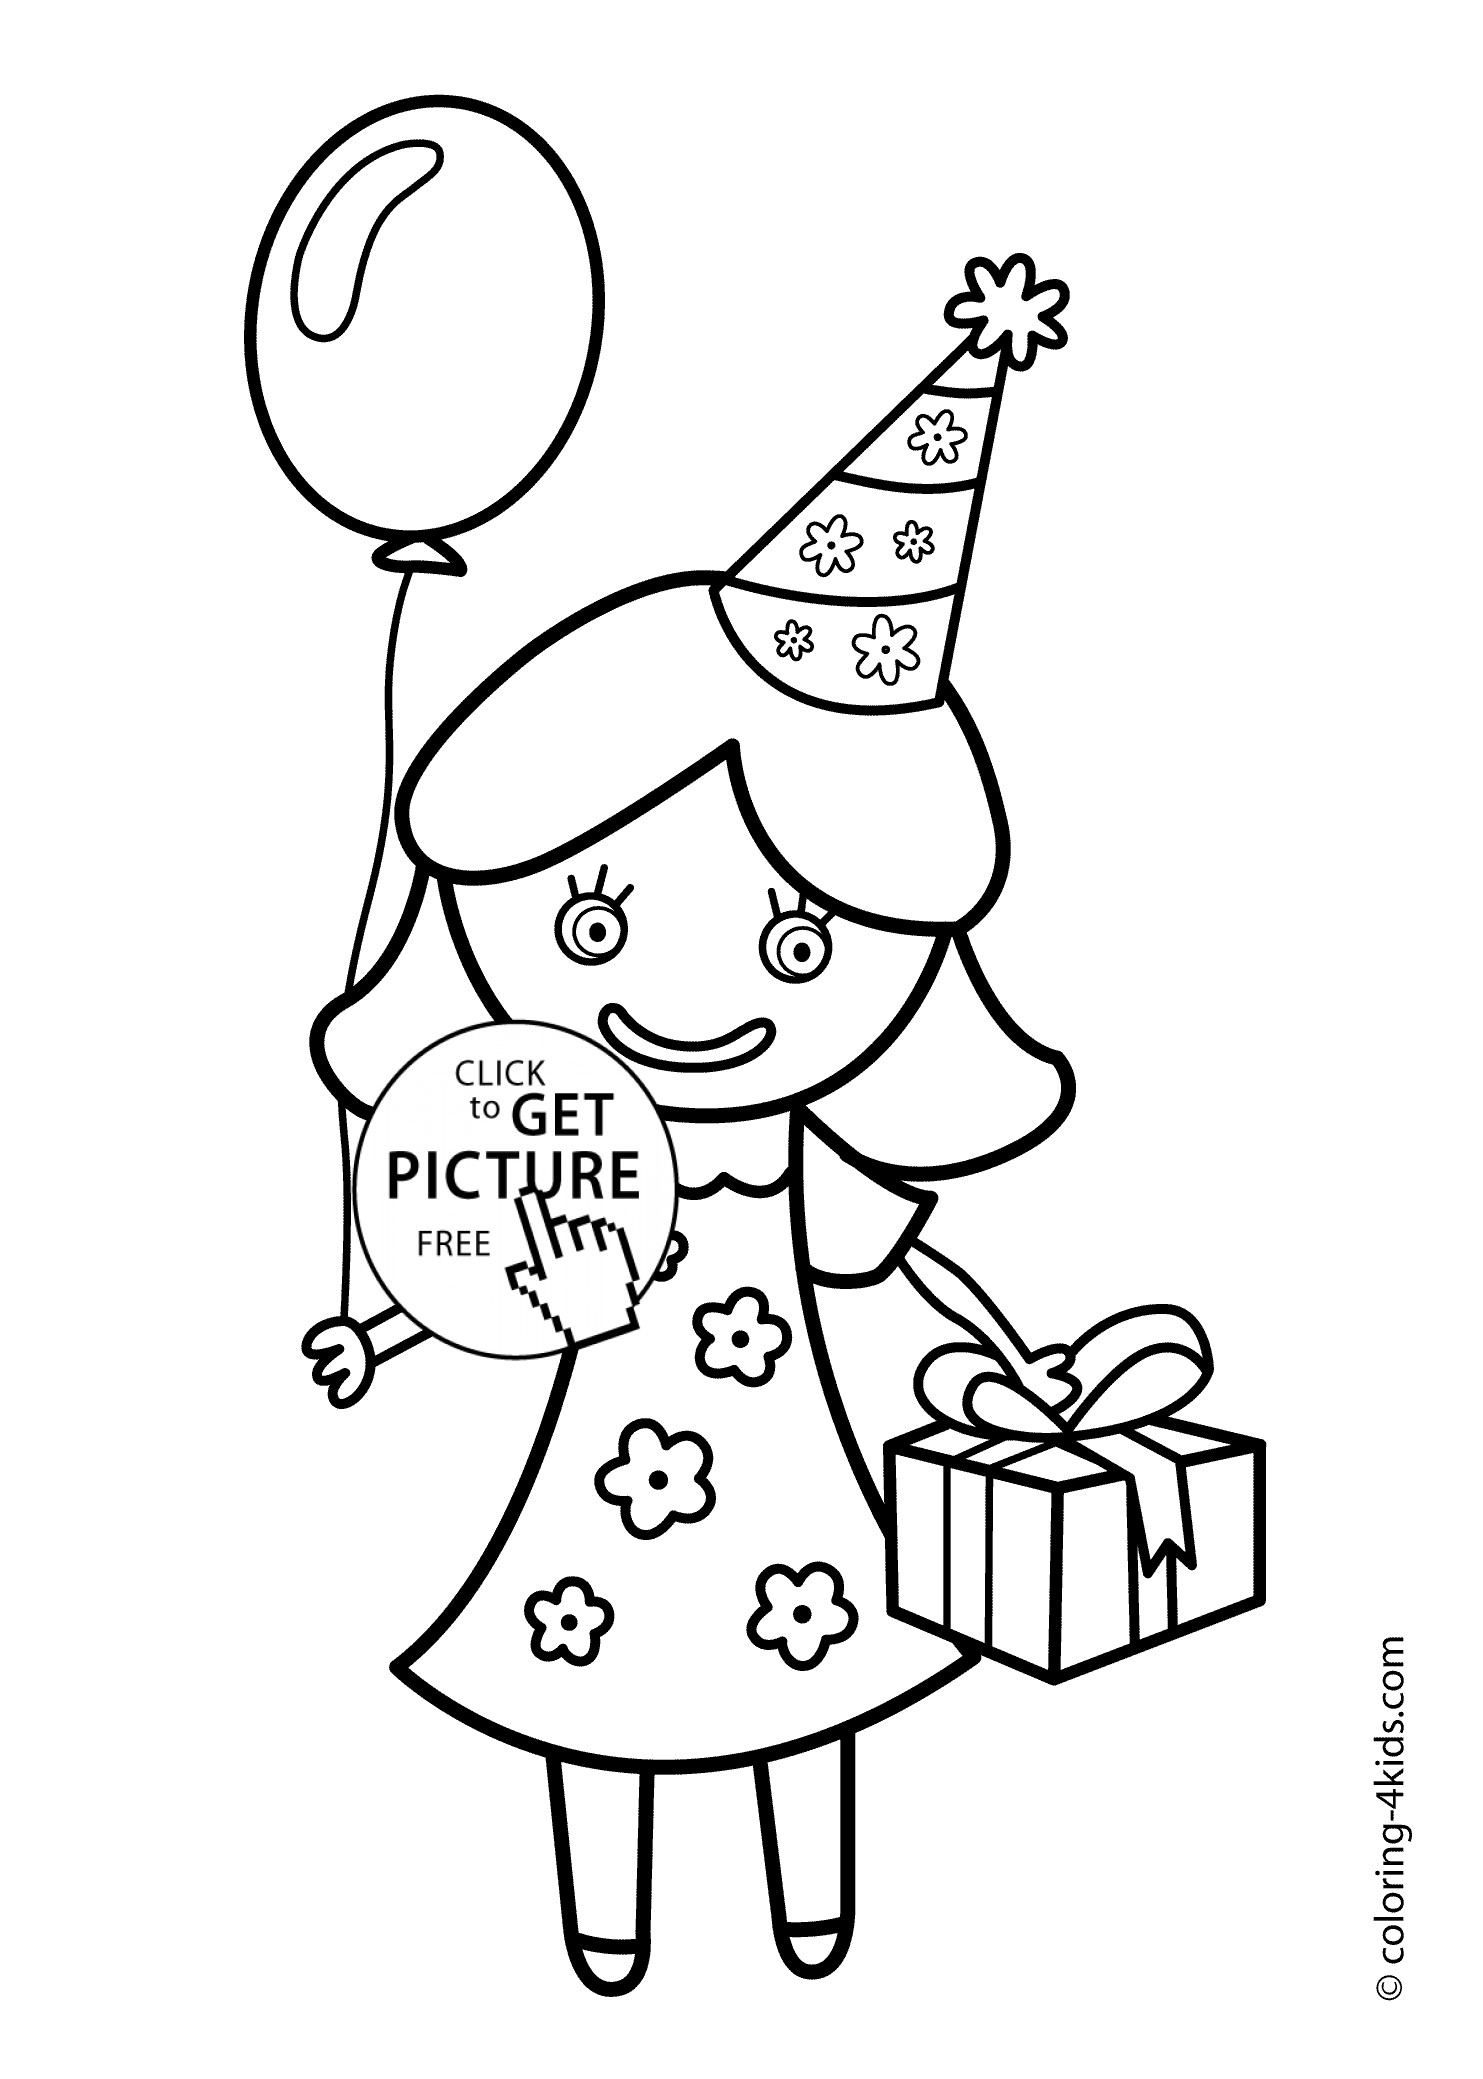 Coloring Sheets For Girls That Have A Birthday9
 Birthday Party Coloring Pages – coloring pages for kids